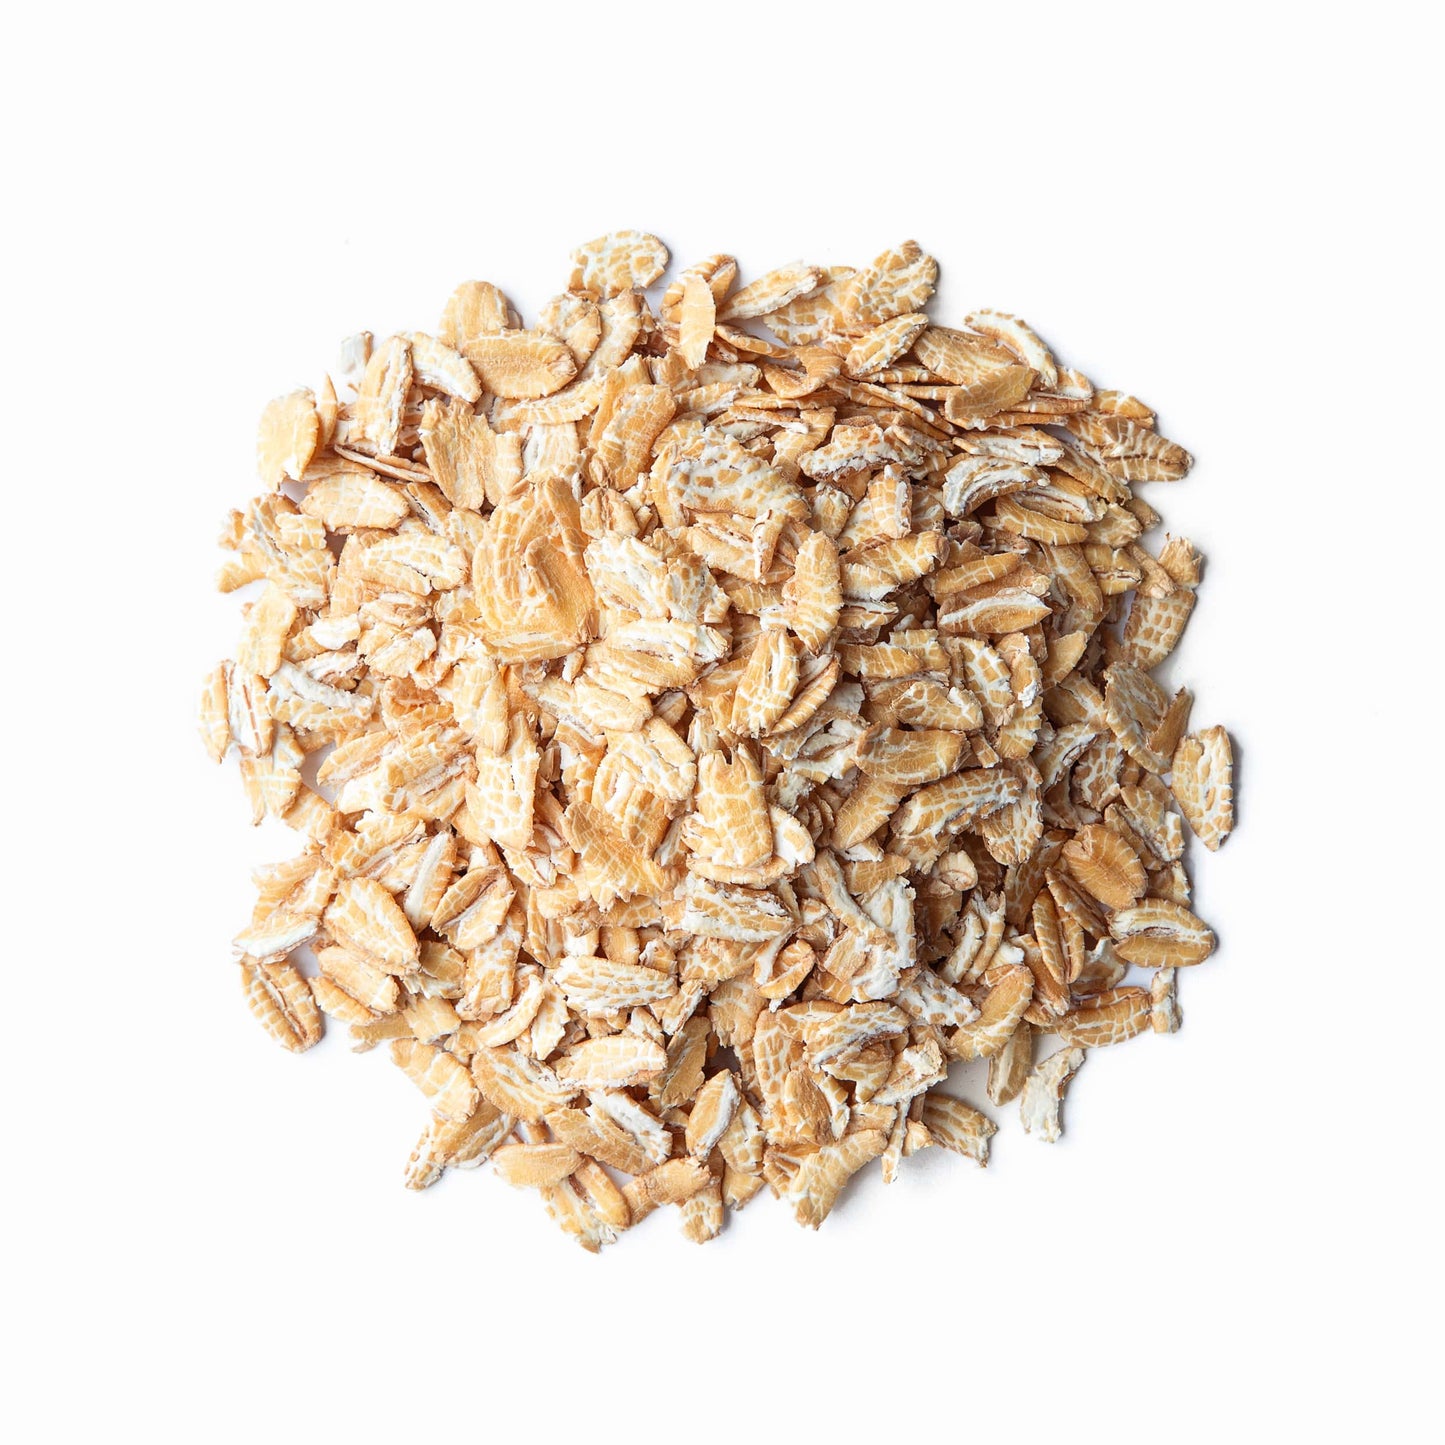 Organic Rolled KAMUT Khorasan Wheat Flakes - Non-GMO, Made from Whole Wheat Berries, Kosher, Great for Cereal, Granola - by Food to Live